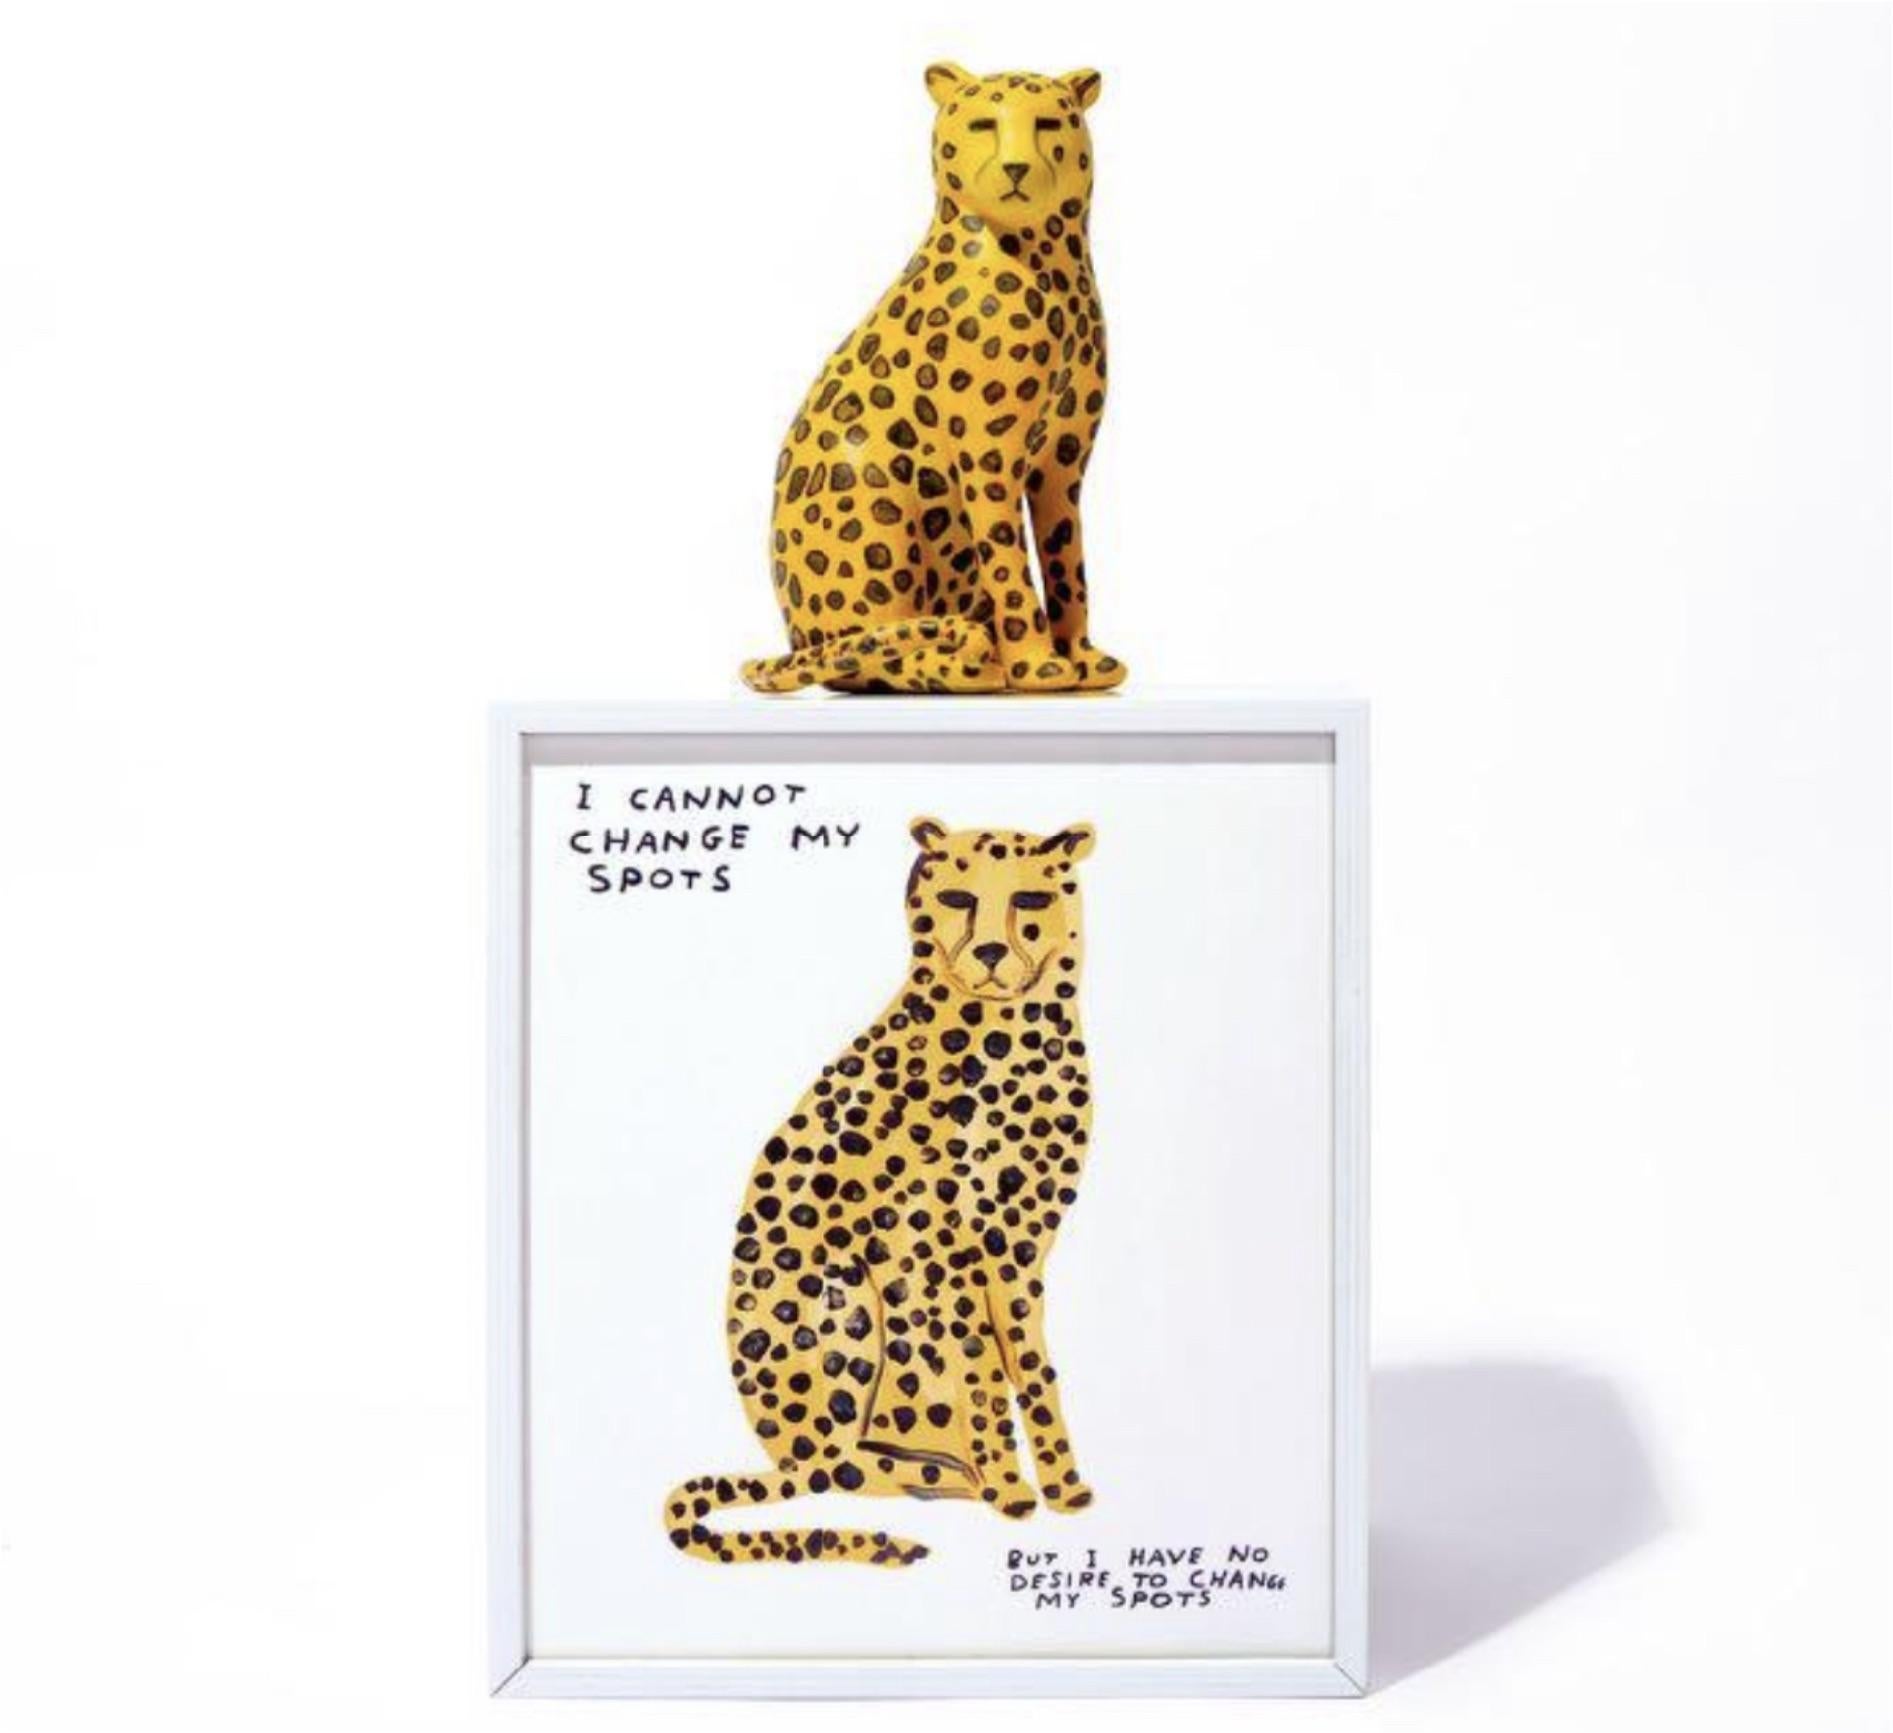 David Shrigley
I Cannot Change My Spots But I Have No Desire To Change My Spots, 2022
Ceramic Sculpture housed in custom box
7 1/2 × 4 7/10 × 4 3/10 in | 19 × 12 × 11 cm
Edition of 75